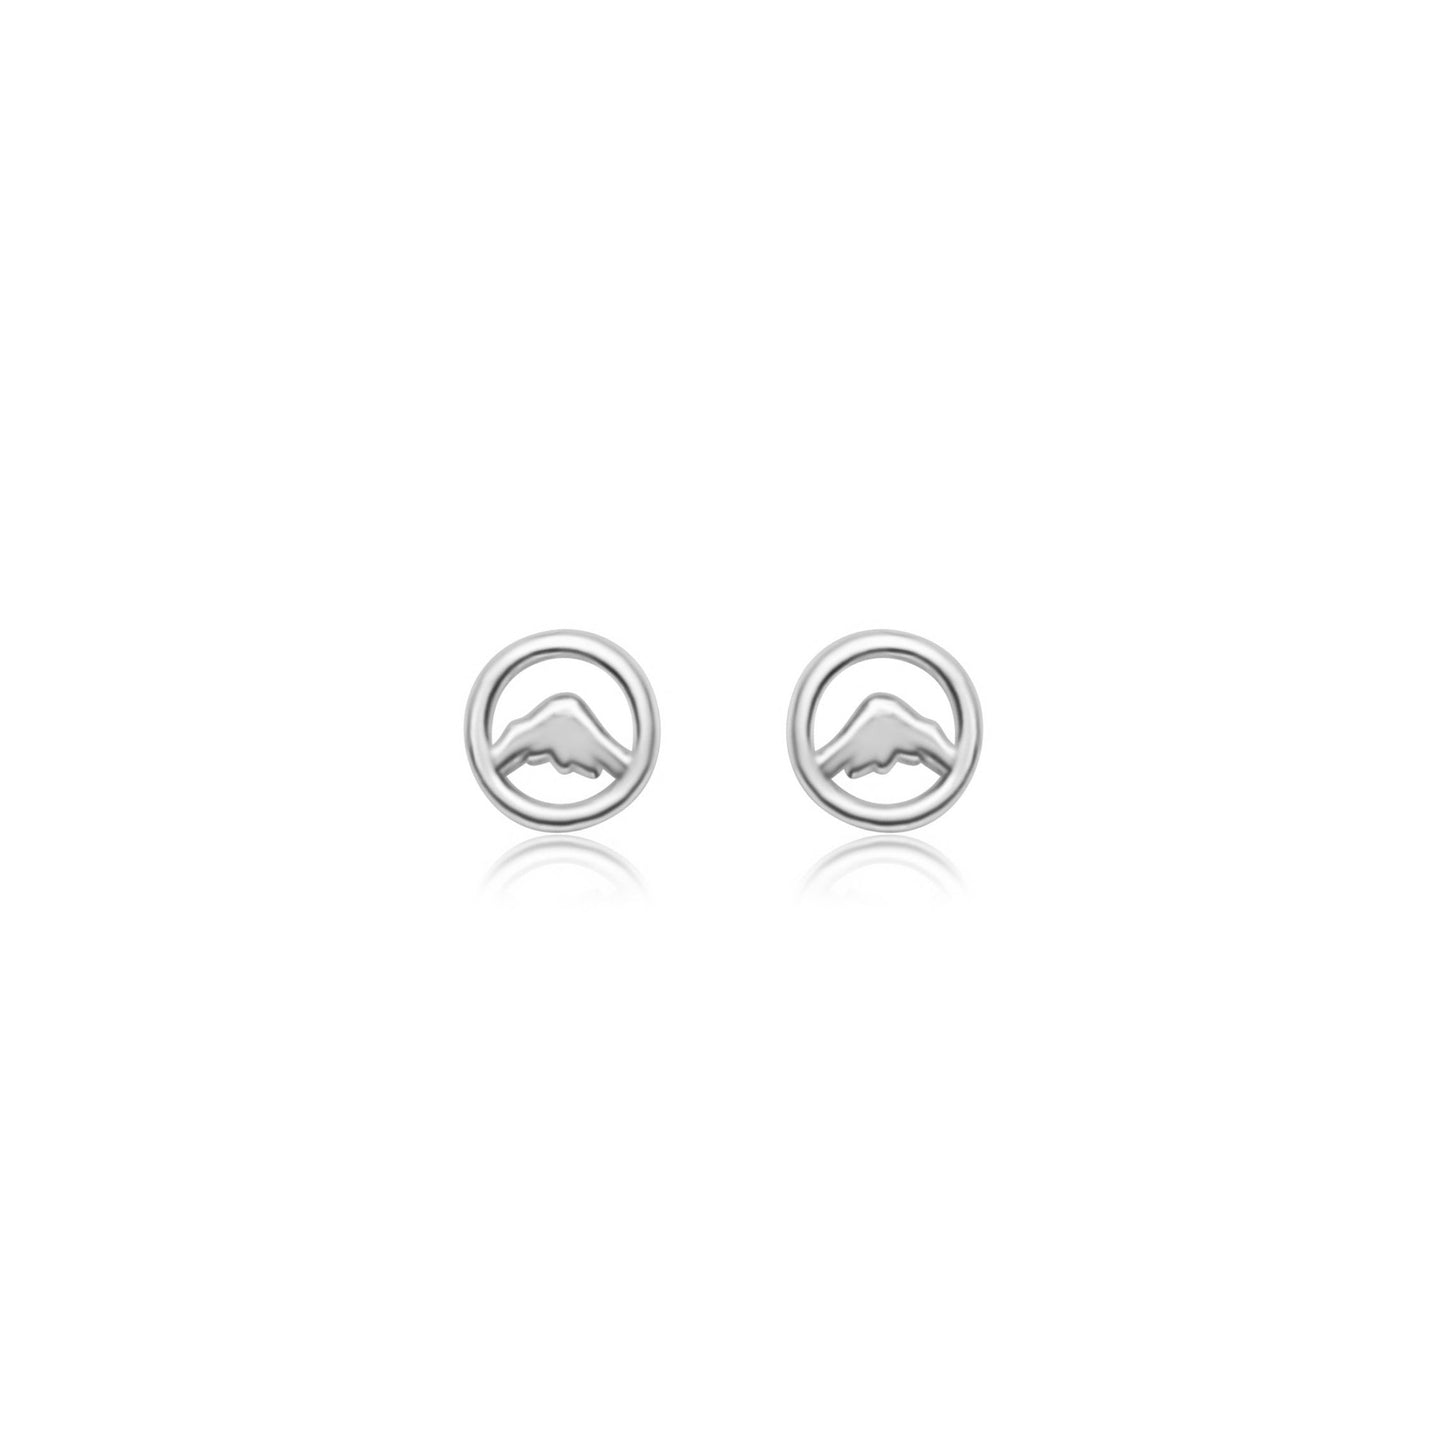 sterling silver Beaumont stud earrings with small circle mountain charm